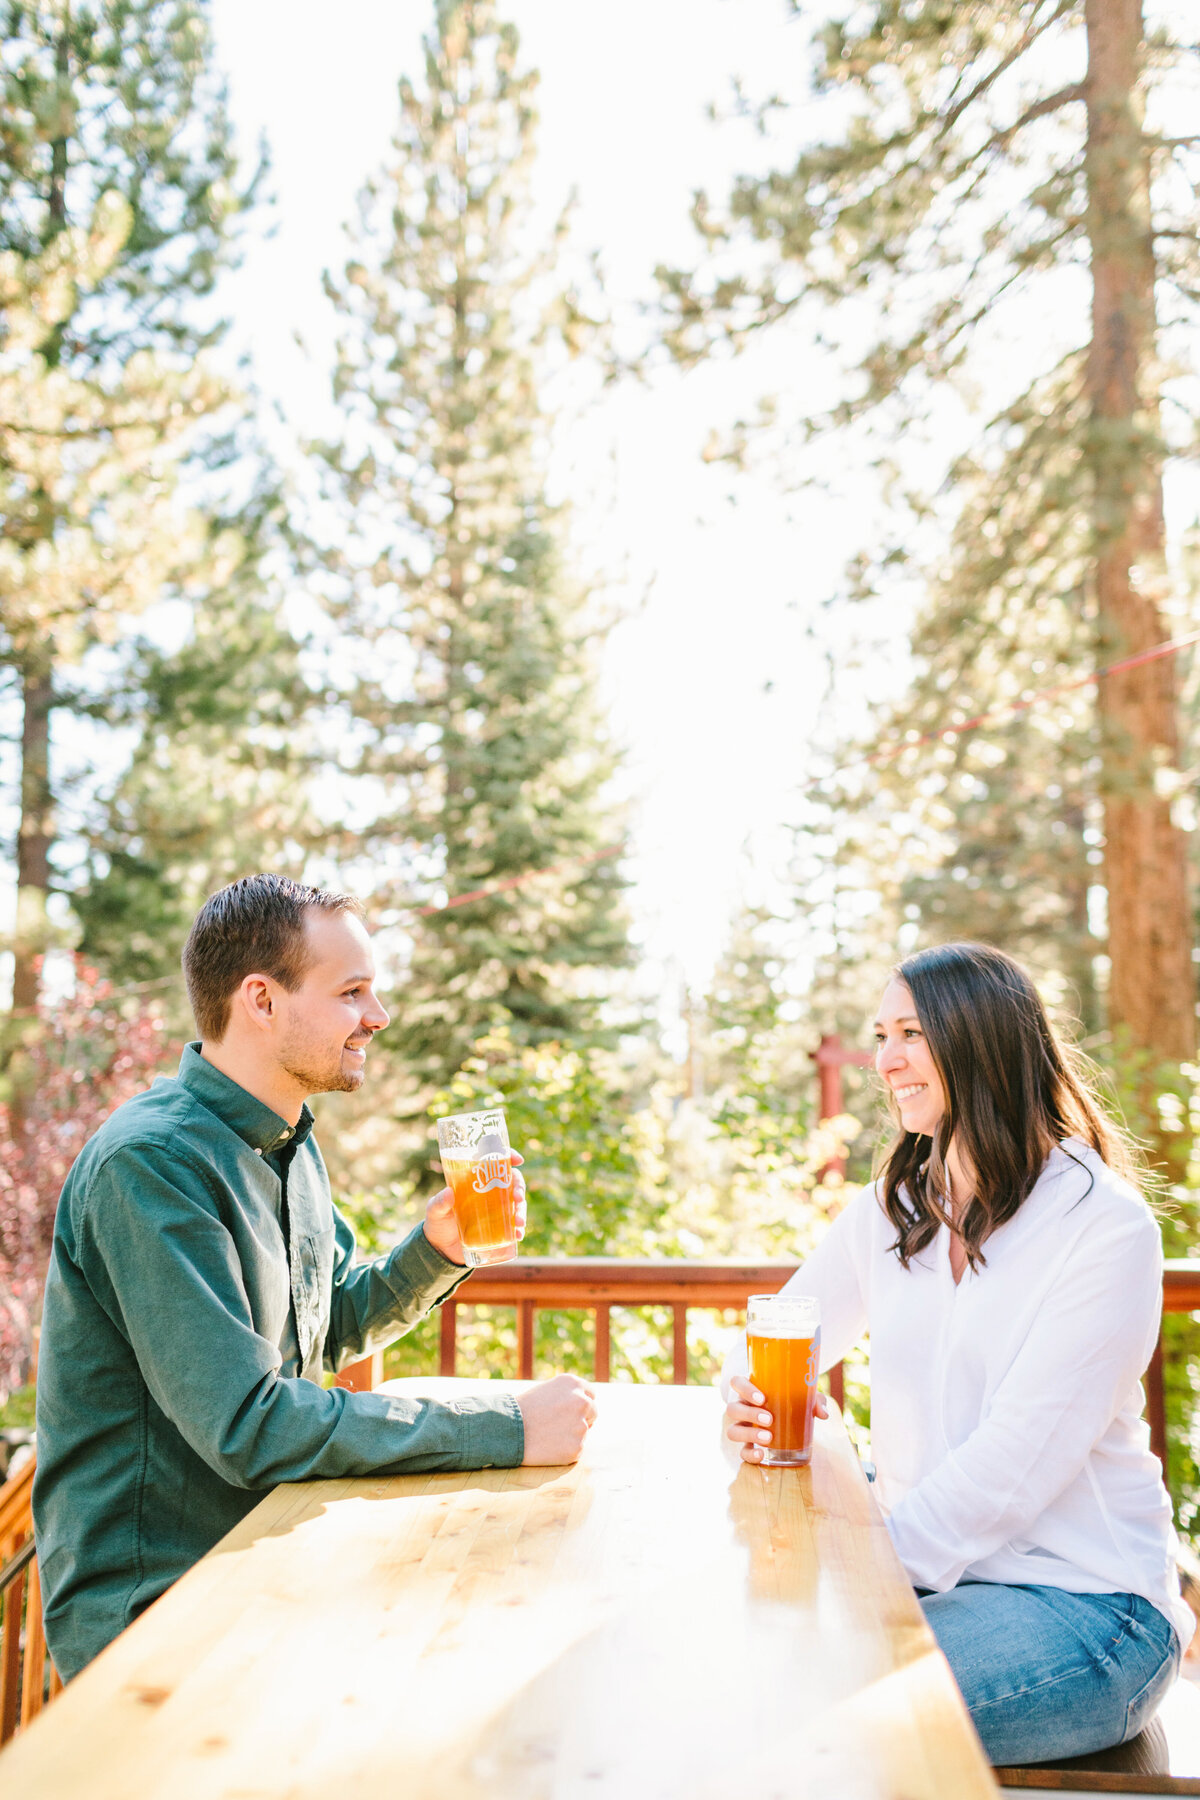 Best California and Texas Engagement Photographer-Jodee Debes Photography-201